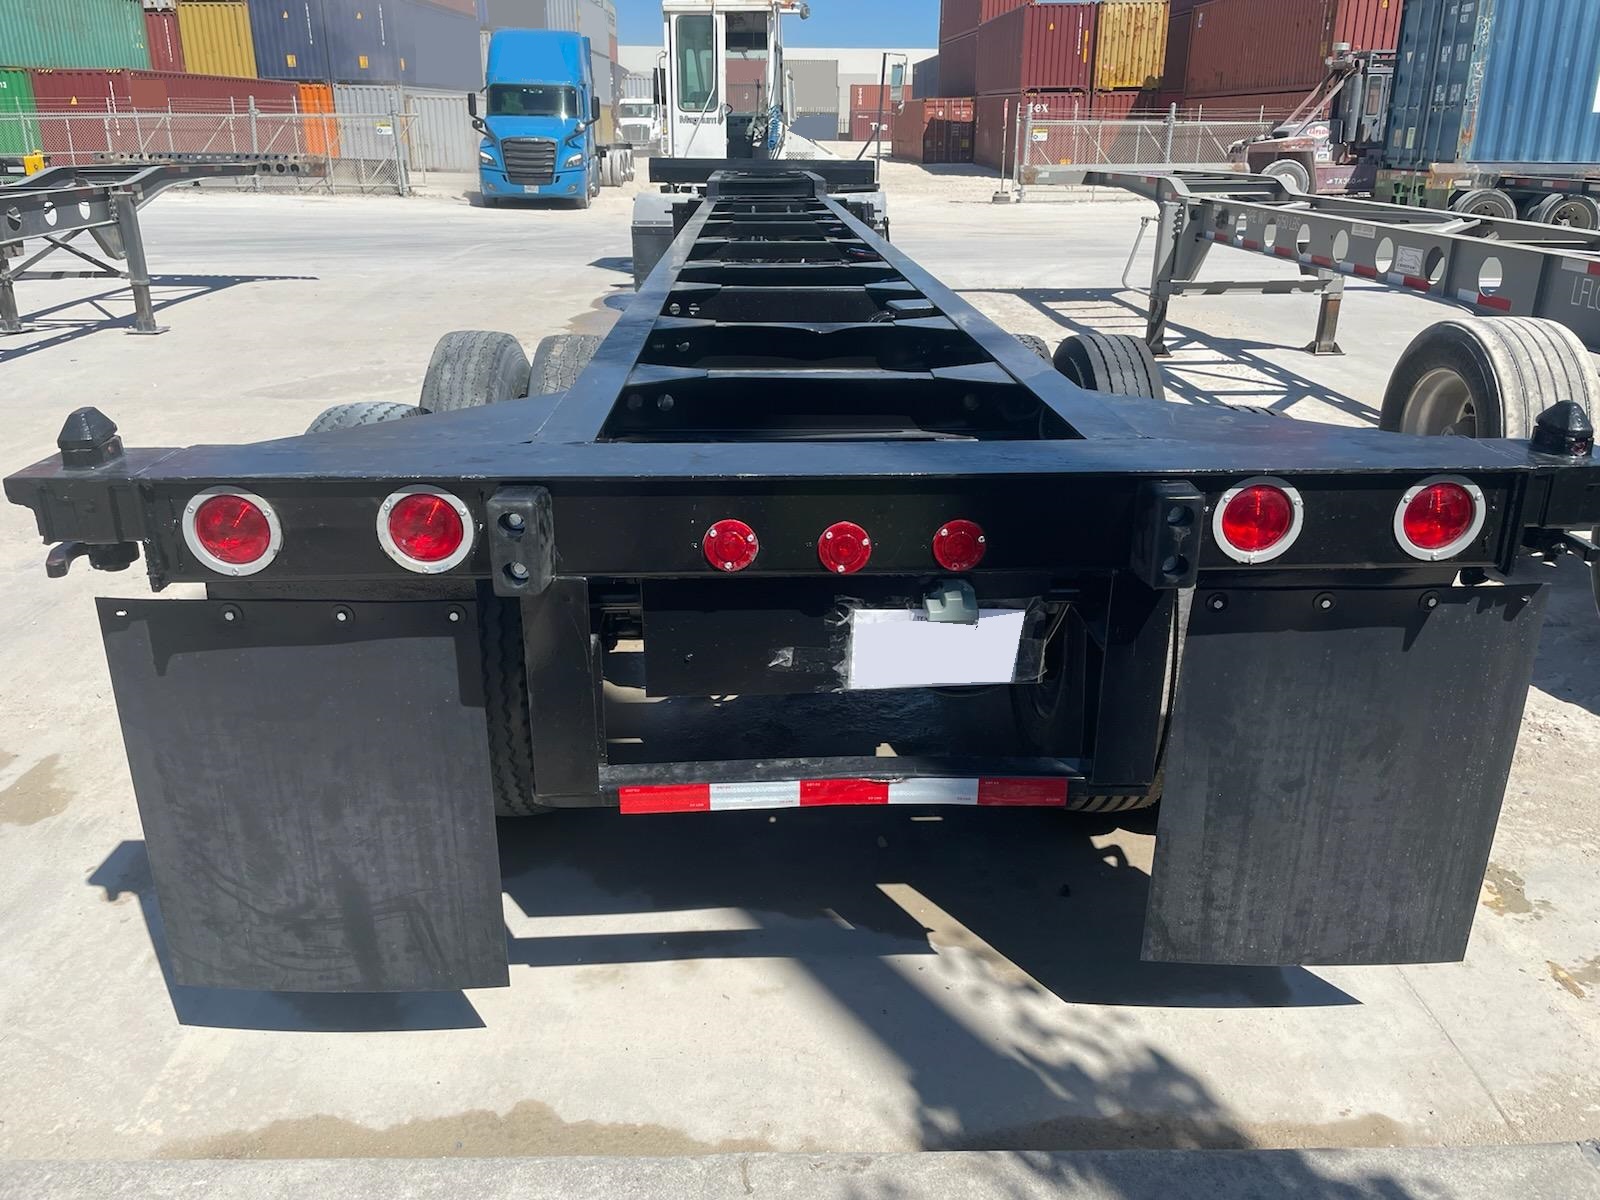 40-48 Extendable Cotainer Chassis - 157877 (5)